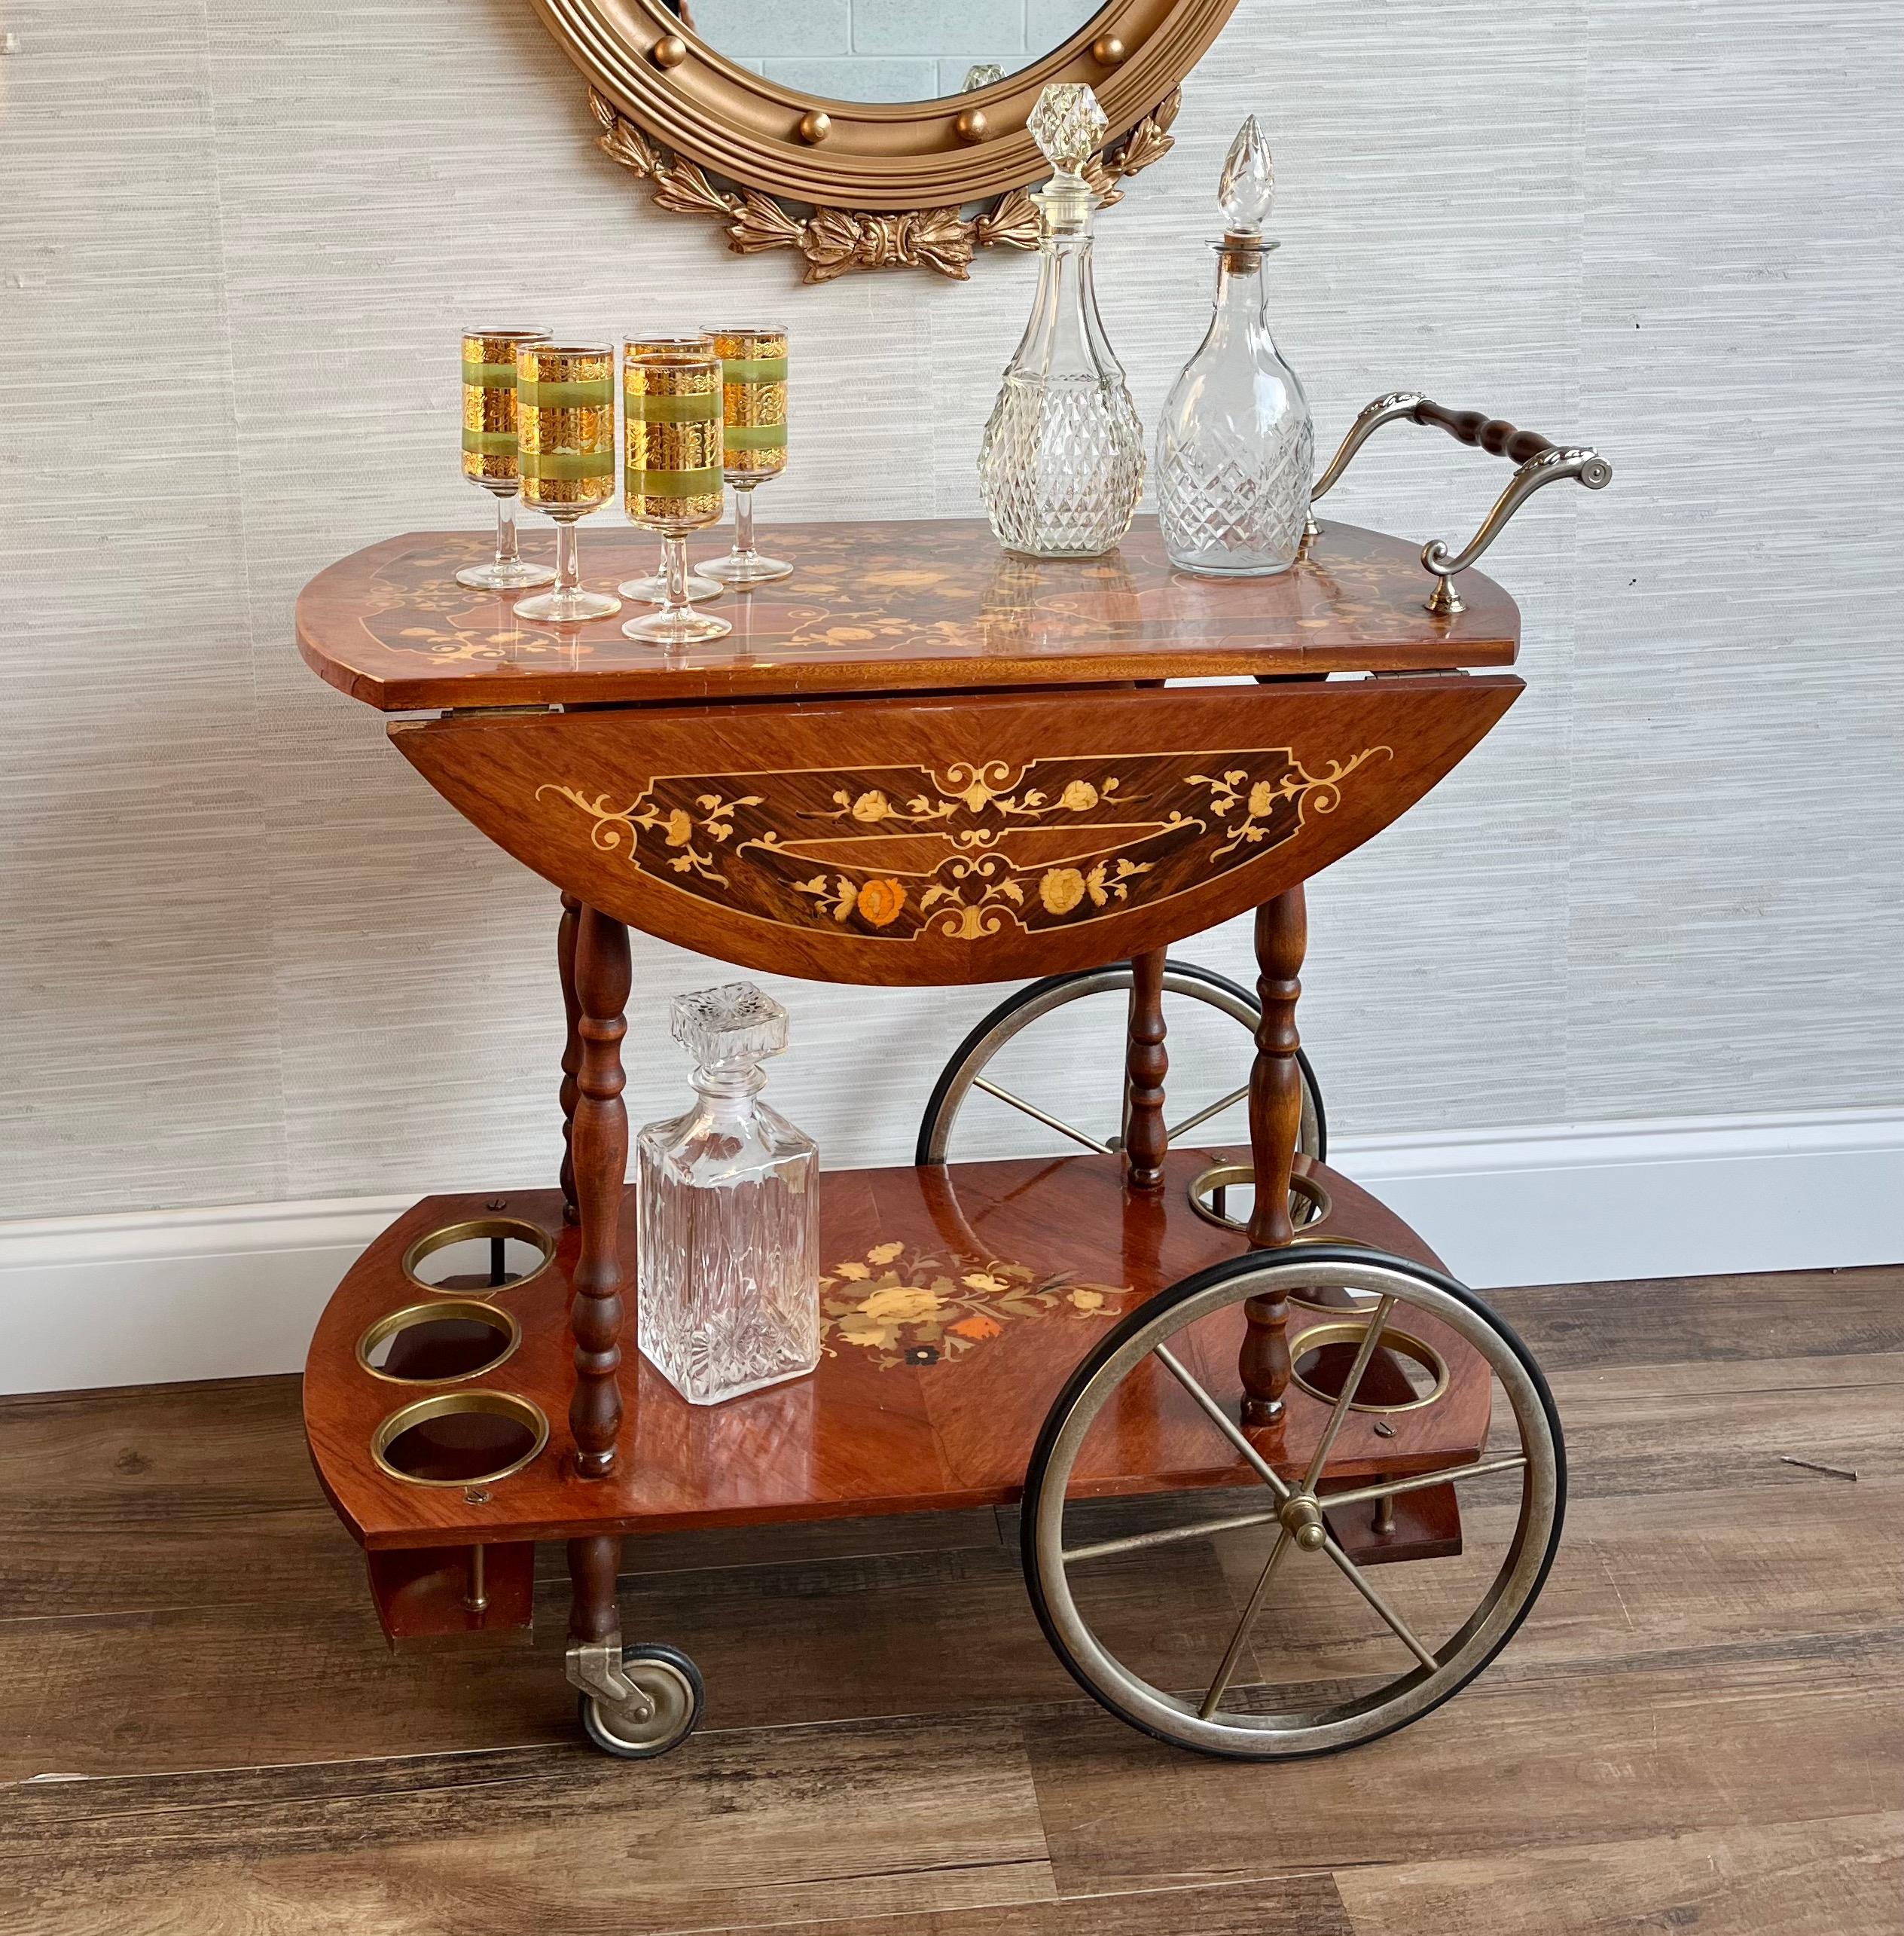 This Italian-style serving cart is a stunning piece of furniture that will add a touch of elegance to any room. The cart features beautiful inlaid wood marquetry that is expertly crafted and designed to impress. The cart is equipped with four